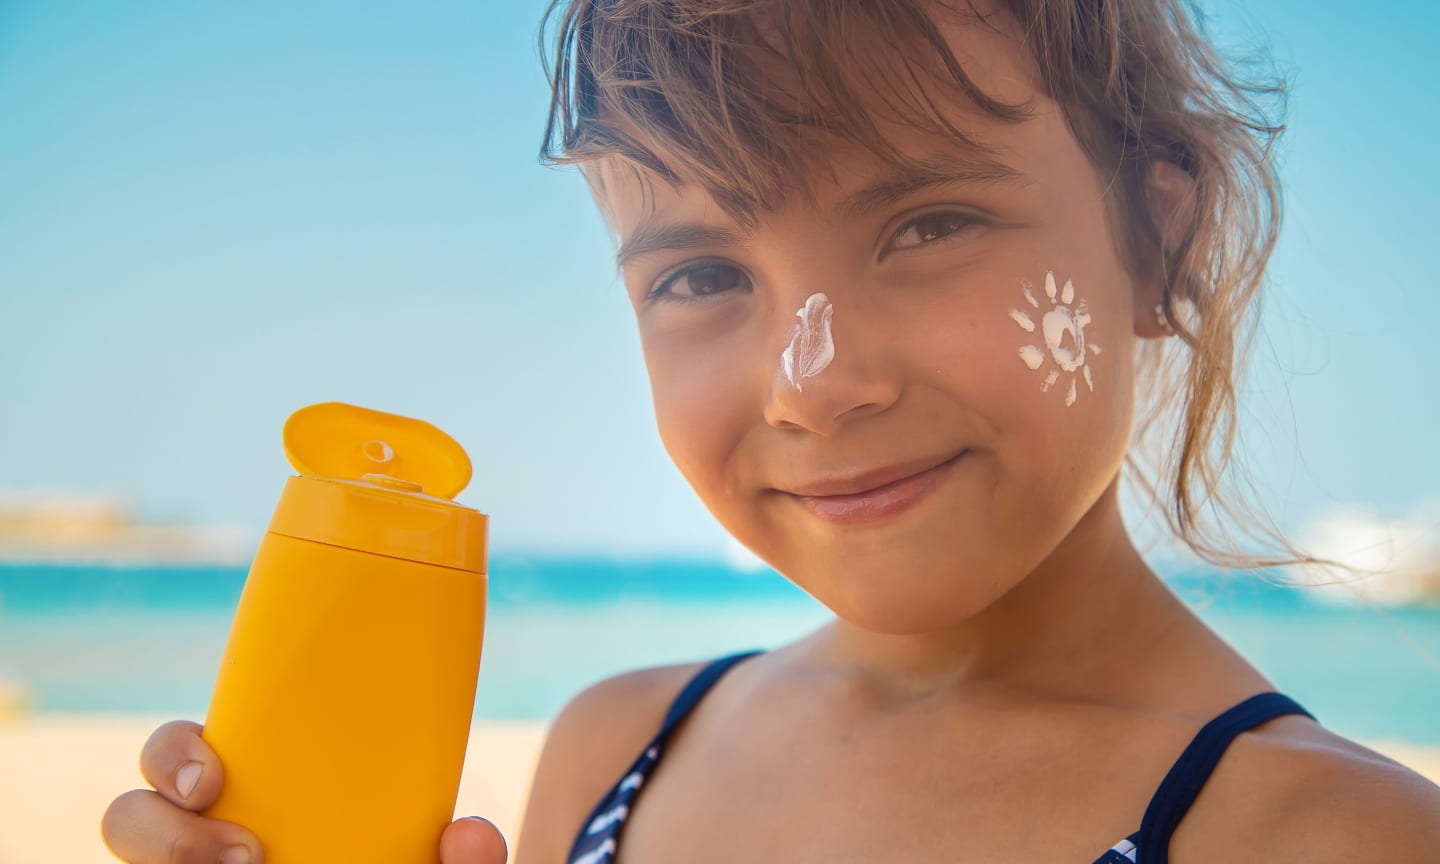 A child wearing sunscreen on their nose